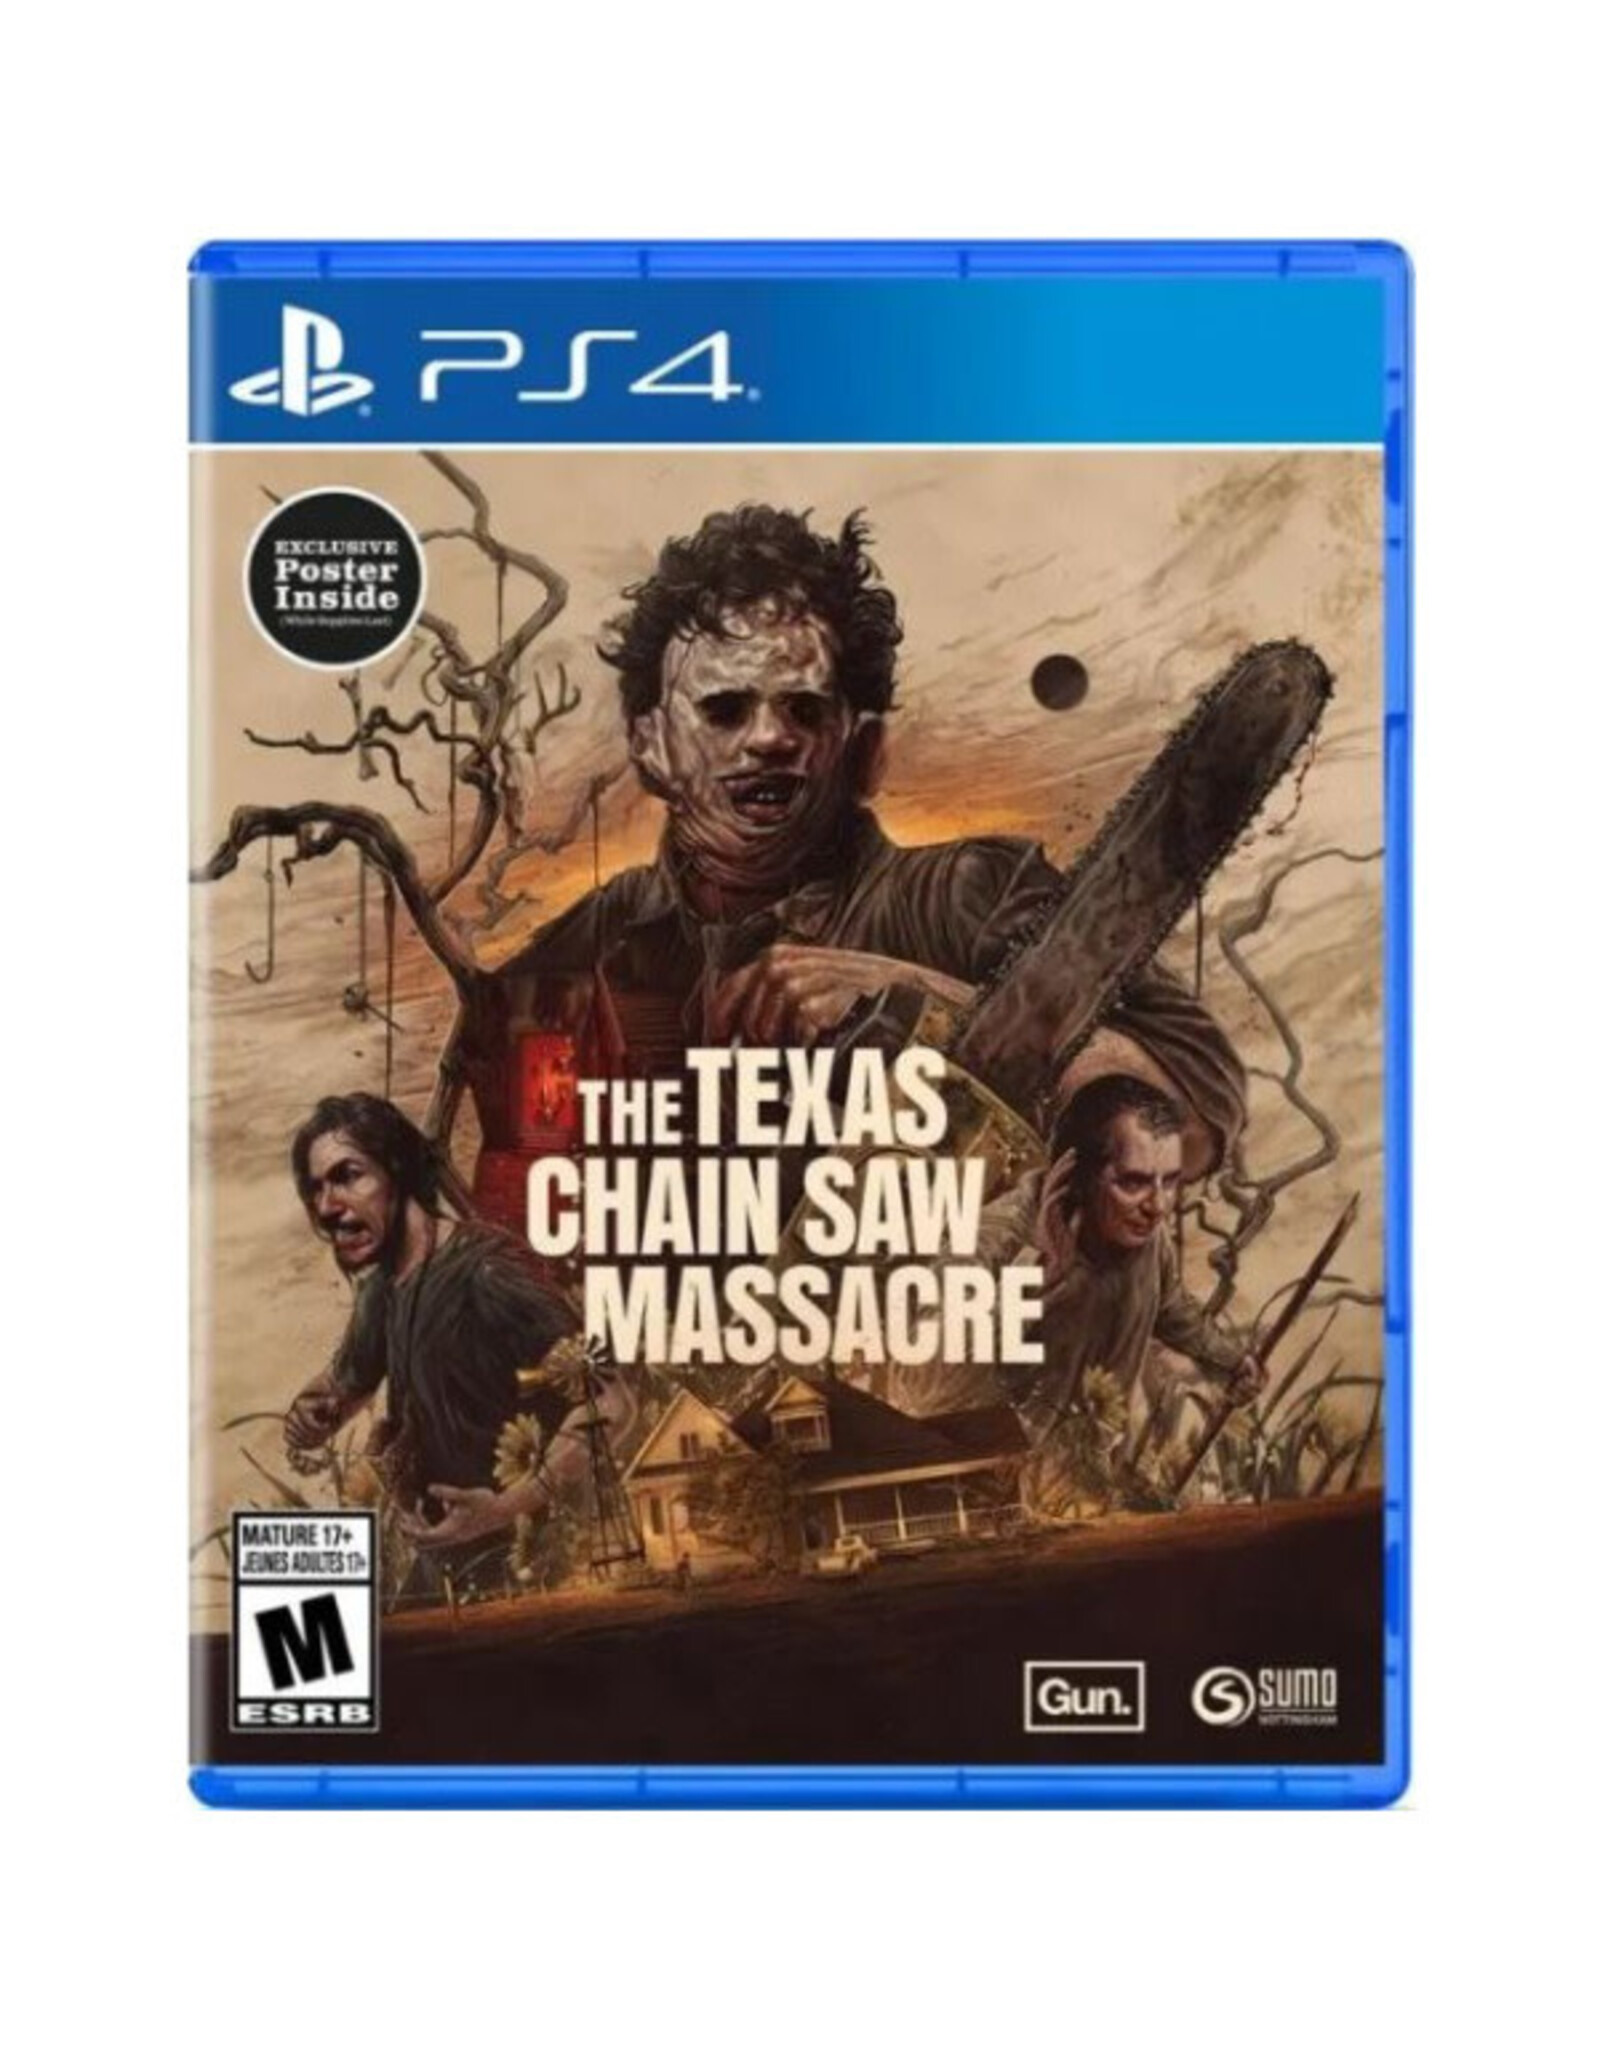 Playstation 4 Texas Chainsaw Massacre, The (PS4)